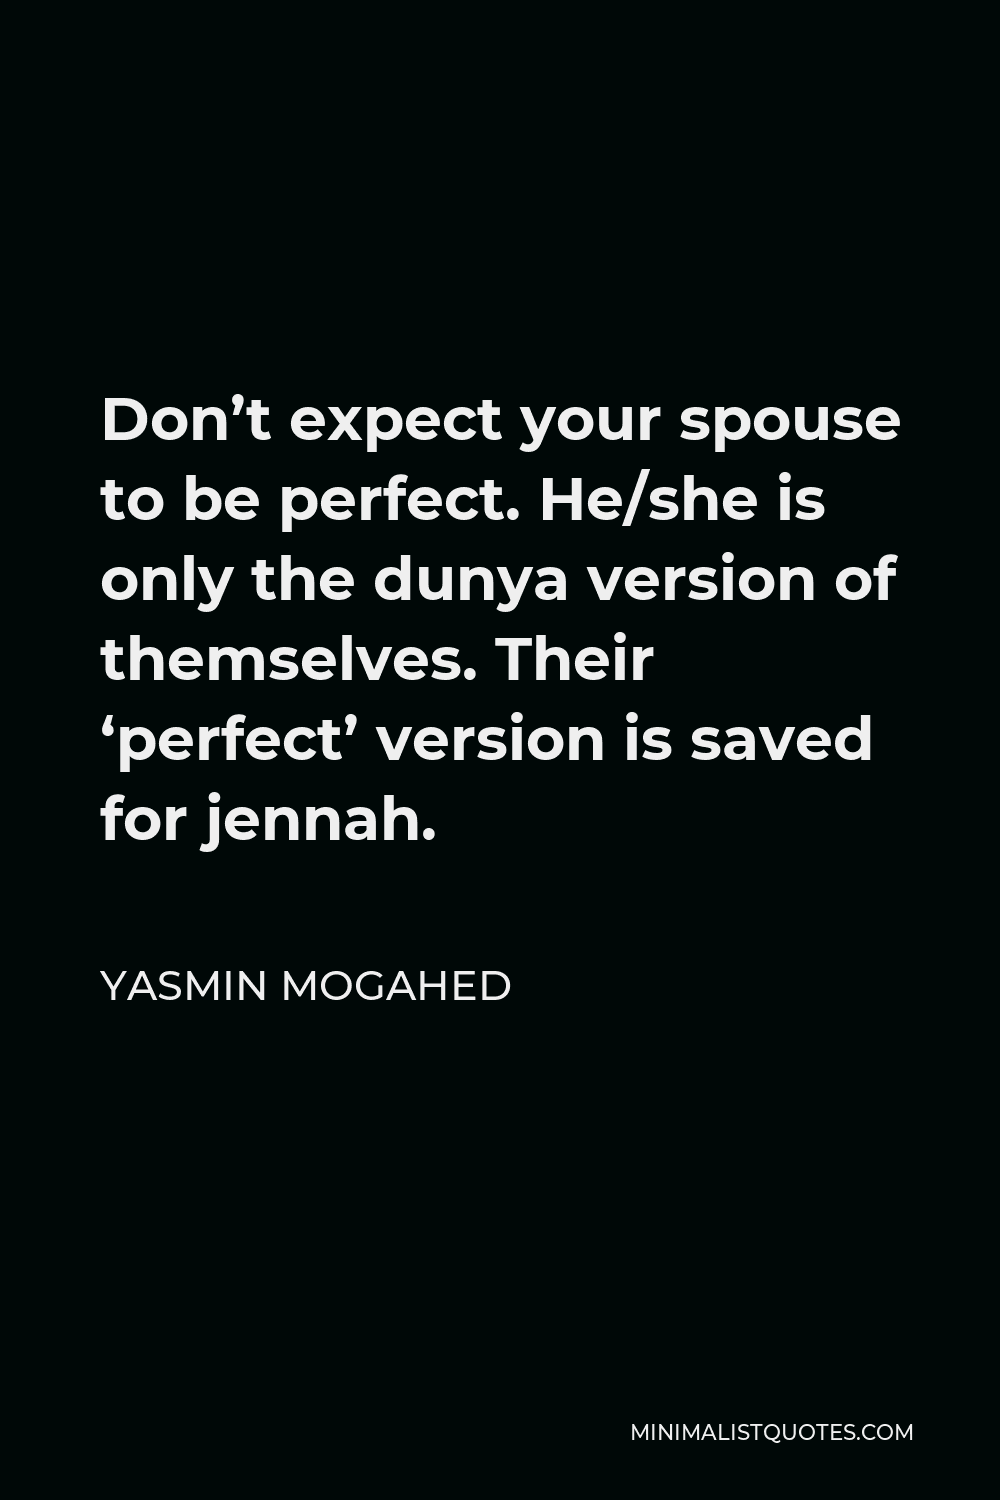 Yasmin Mogahed Quote - Don’t expect your spouse to be perfect. He/she is only the dunya version of themselves. Their ‘perfect’ version is saved for jennah.